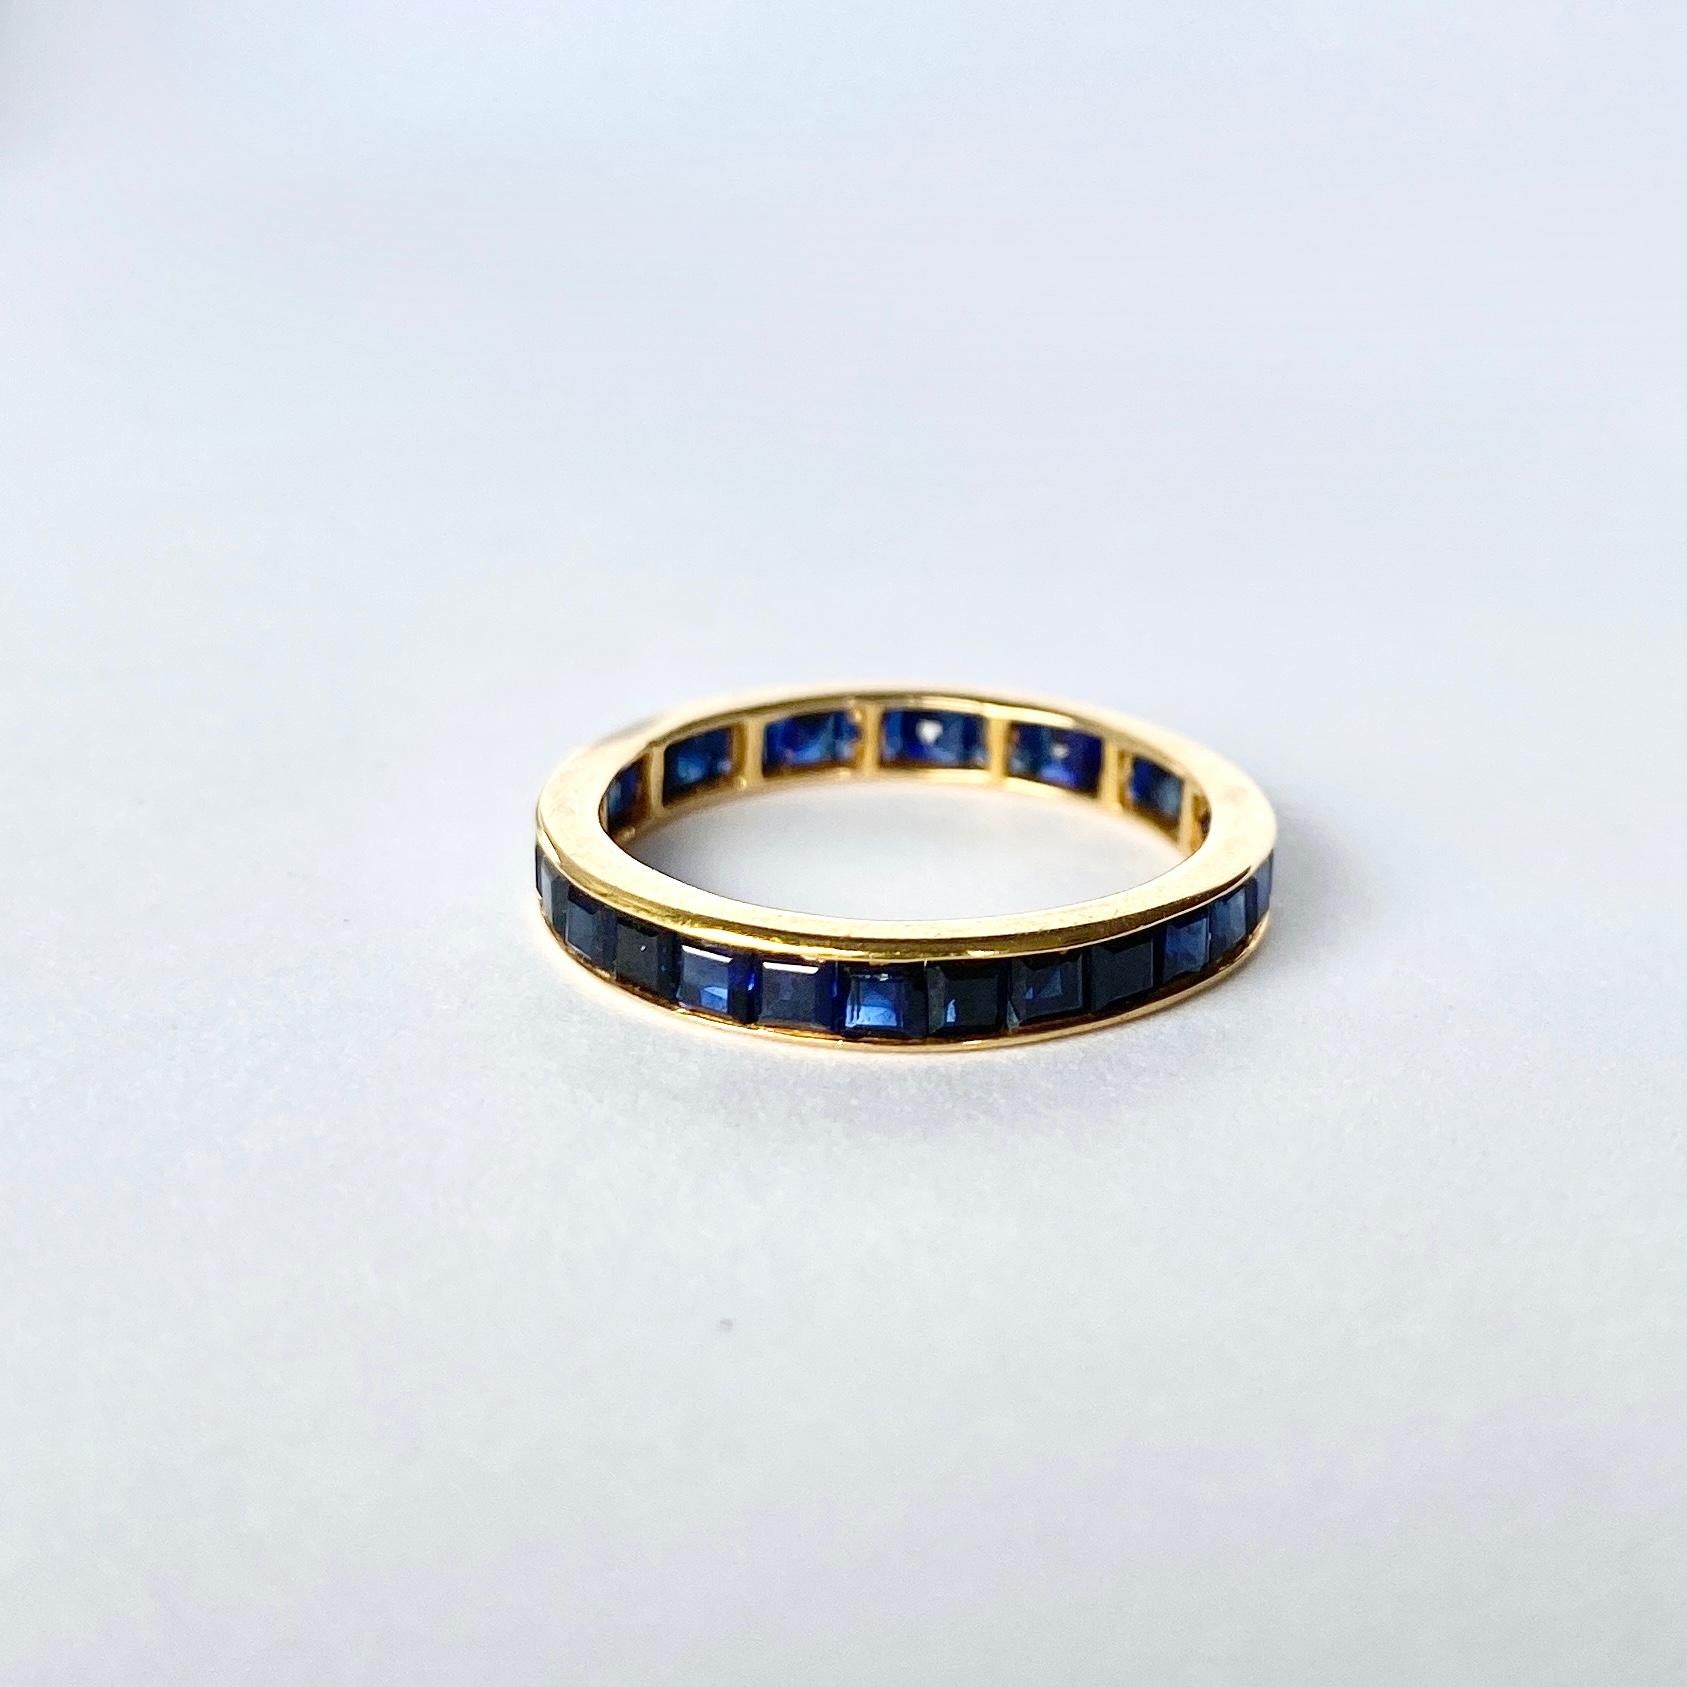 A shining halo of Sapphires is the show stopping detail on this ring. Set in a 18carat gold band which compliments the rubies perfectly. Ruby total approx 1.1carat. 

Ring Size: J 1/2 or 5 
Band Width: 2mm

Weight: 1.6g